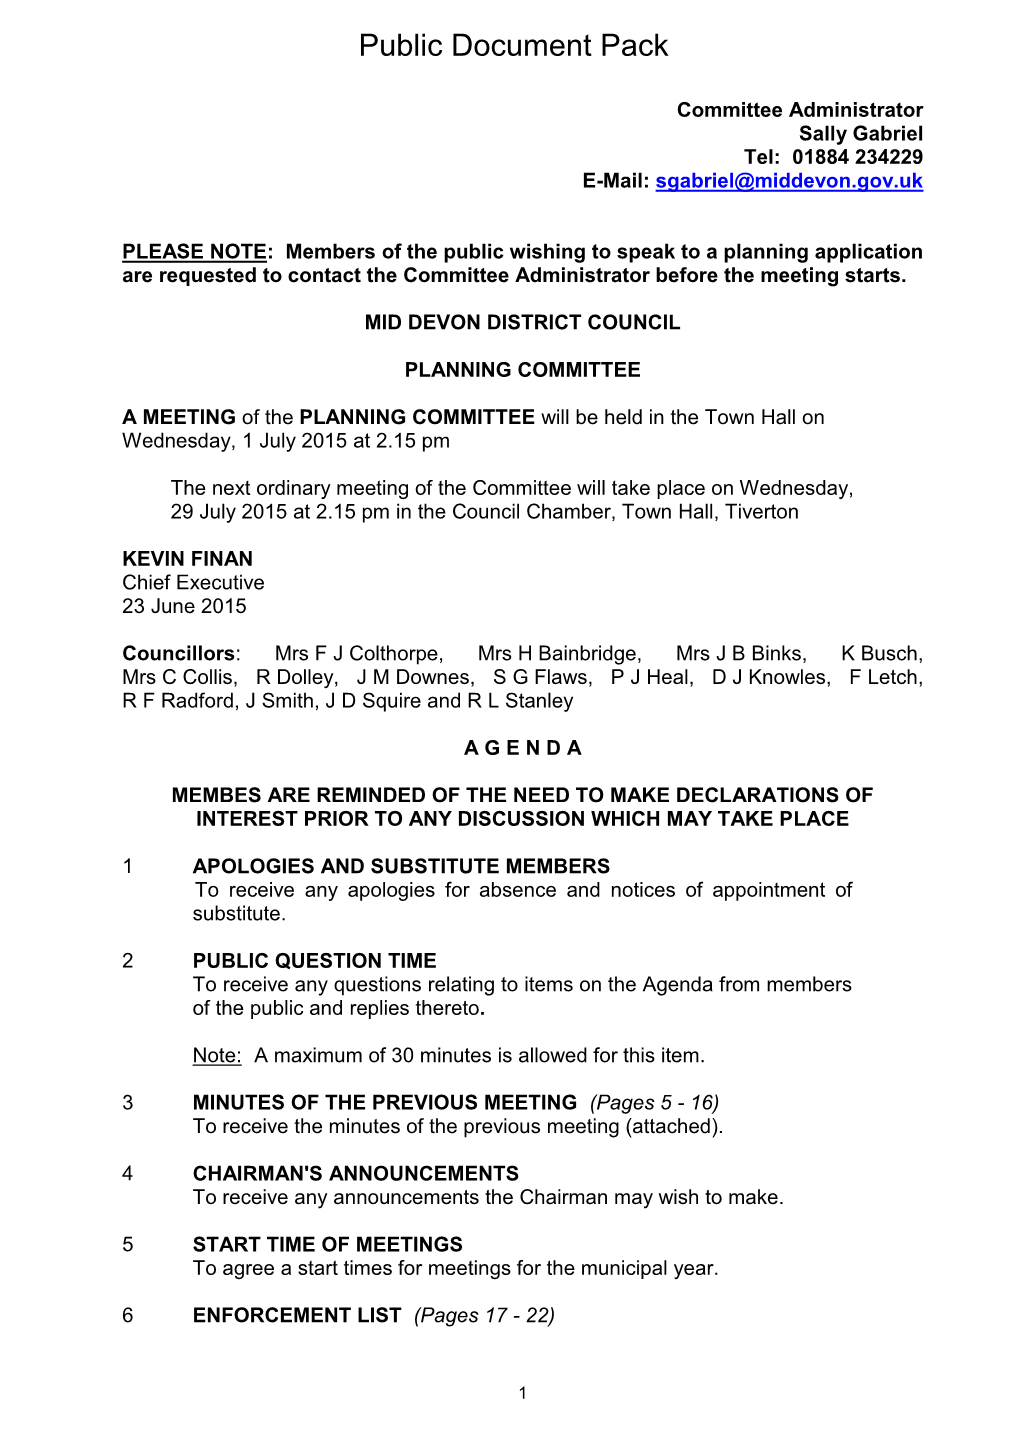 (Public Pack)Agenda Document for Planning Committee, 01/07/2015